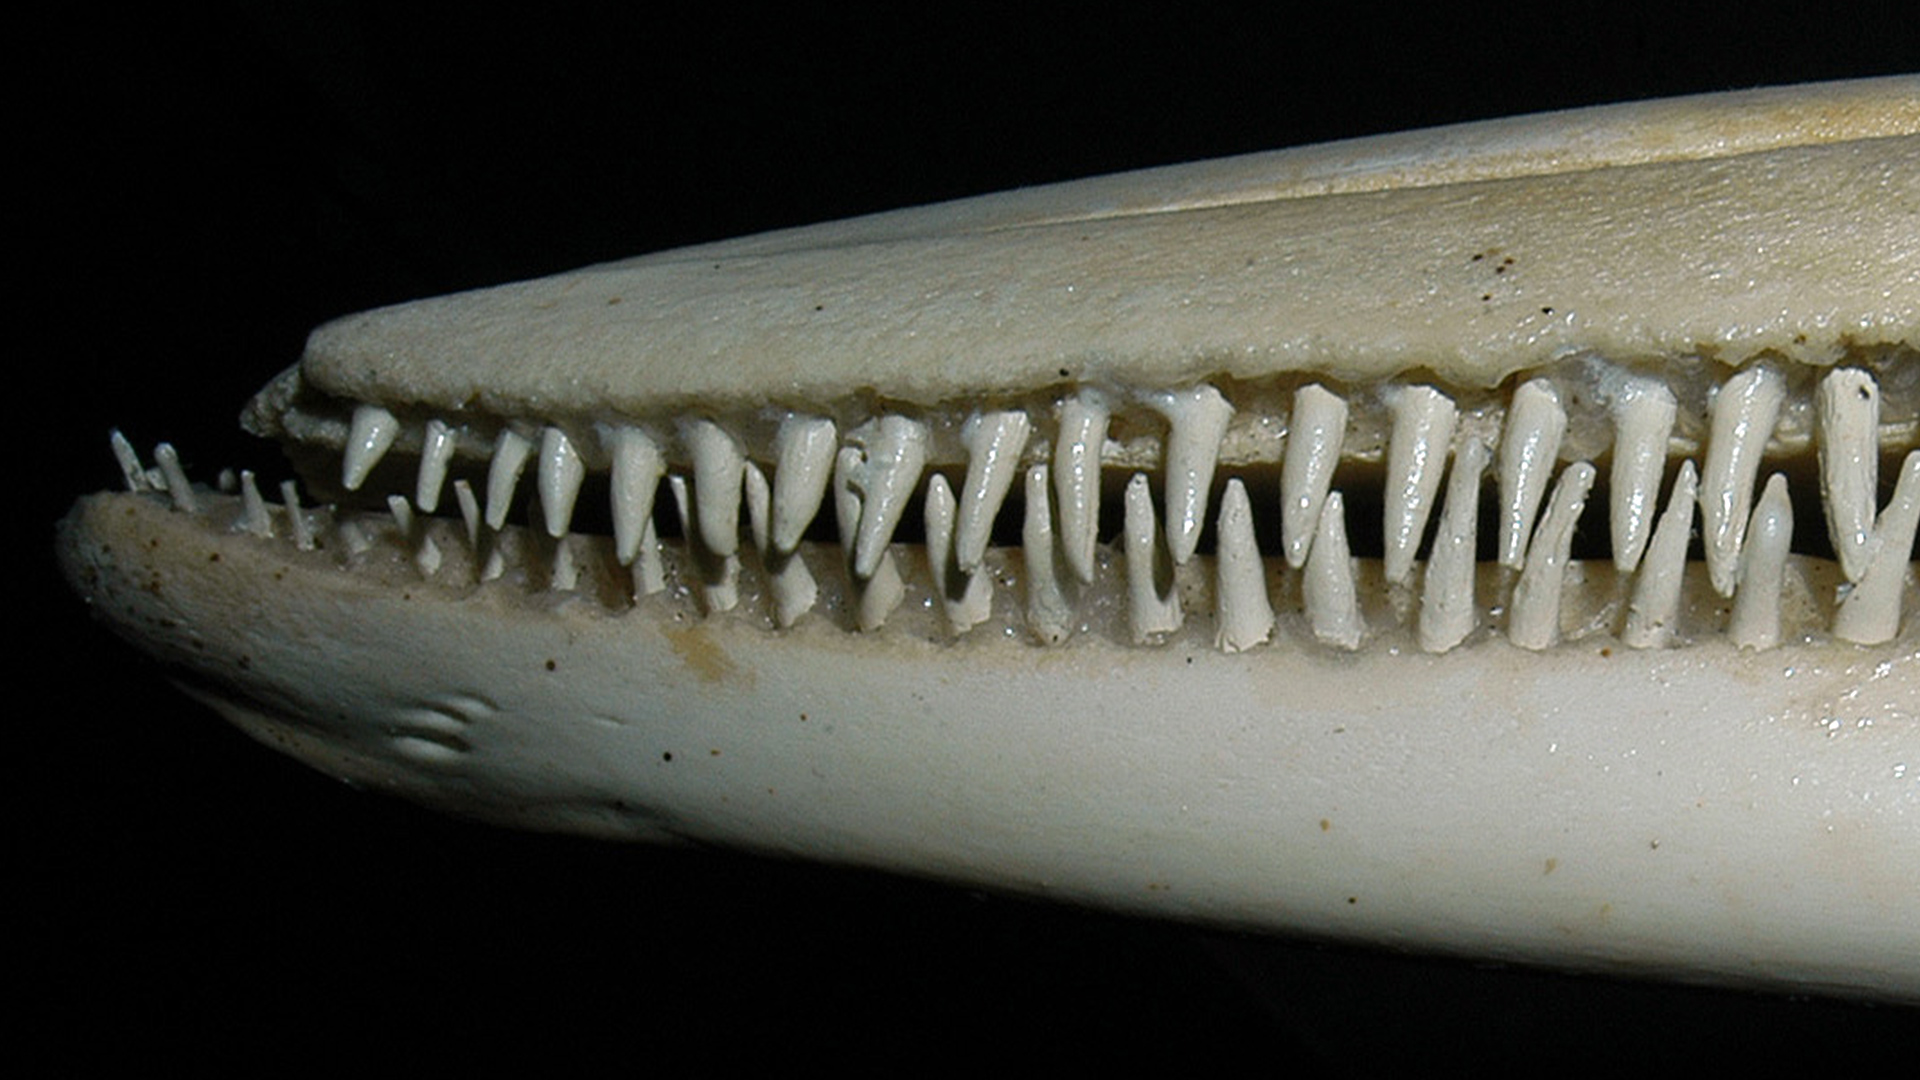 Close-up view of a set of dolphin teeth. The teeth are cone-shaped.